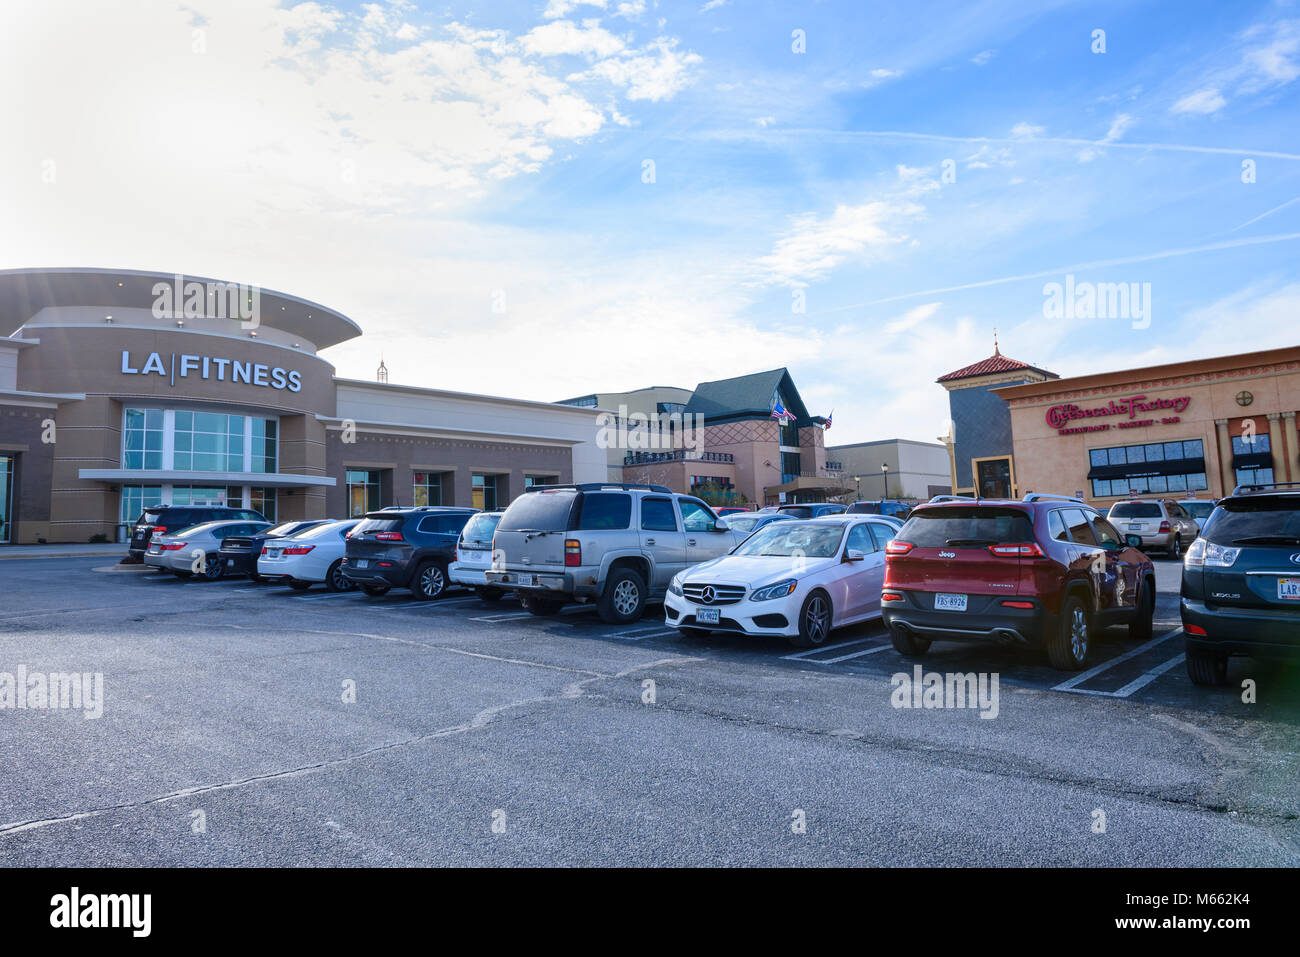 STERLING, VIRGINIA / USA - January 31, 2018: A section of Dulles Town Center showing LA Fitness gym, the Cheesecake factory restaurant and cars parked Stock Photo